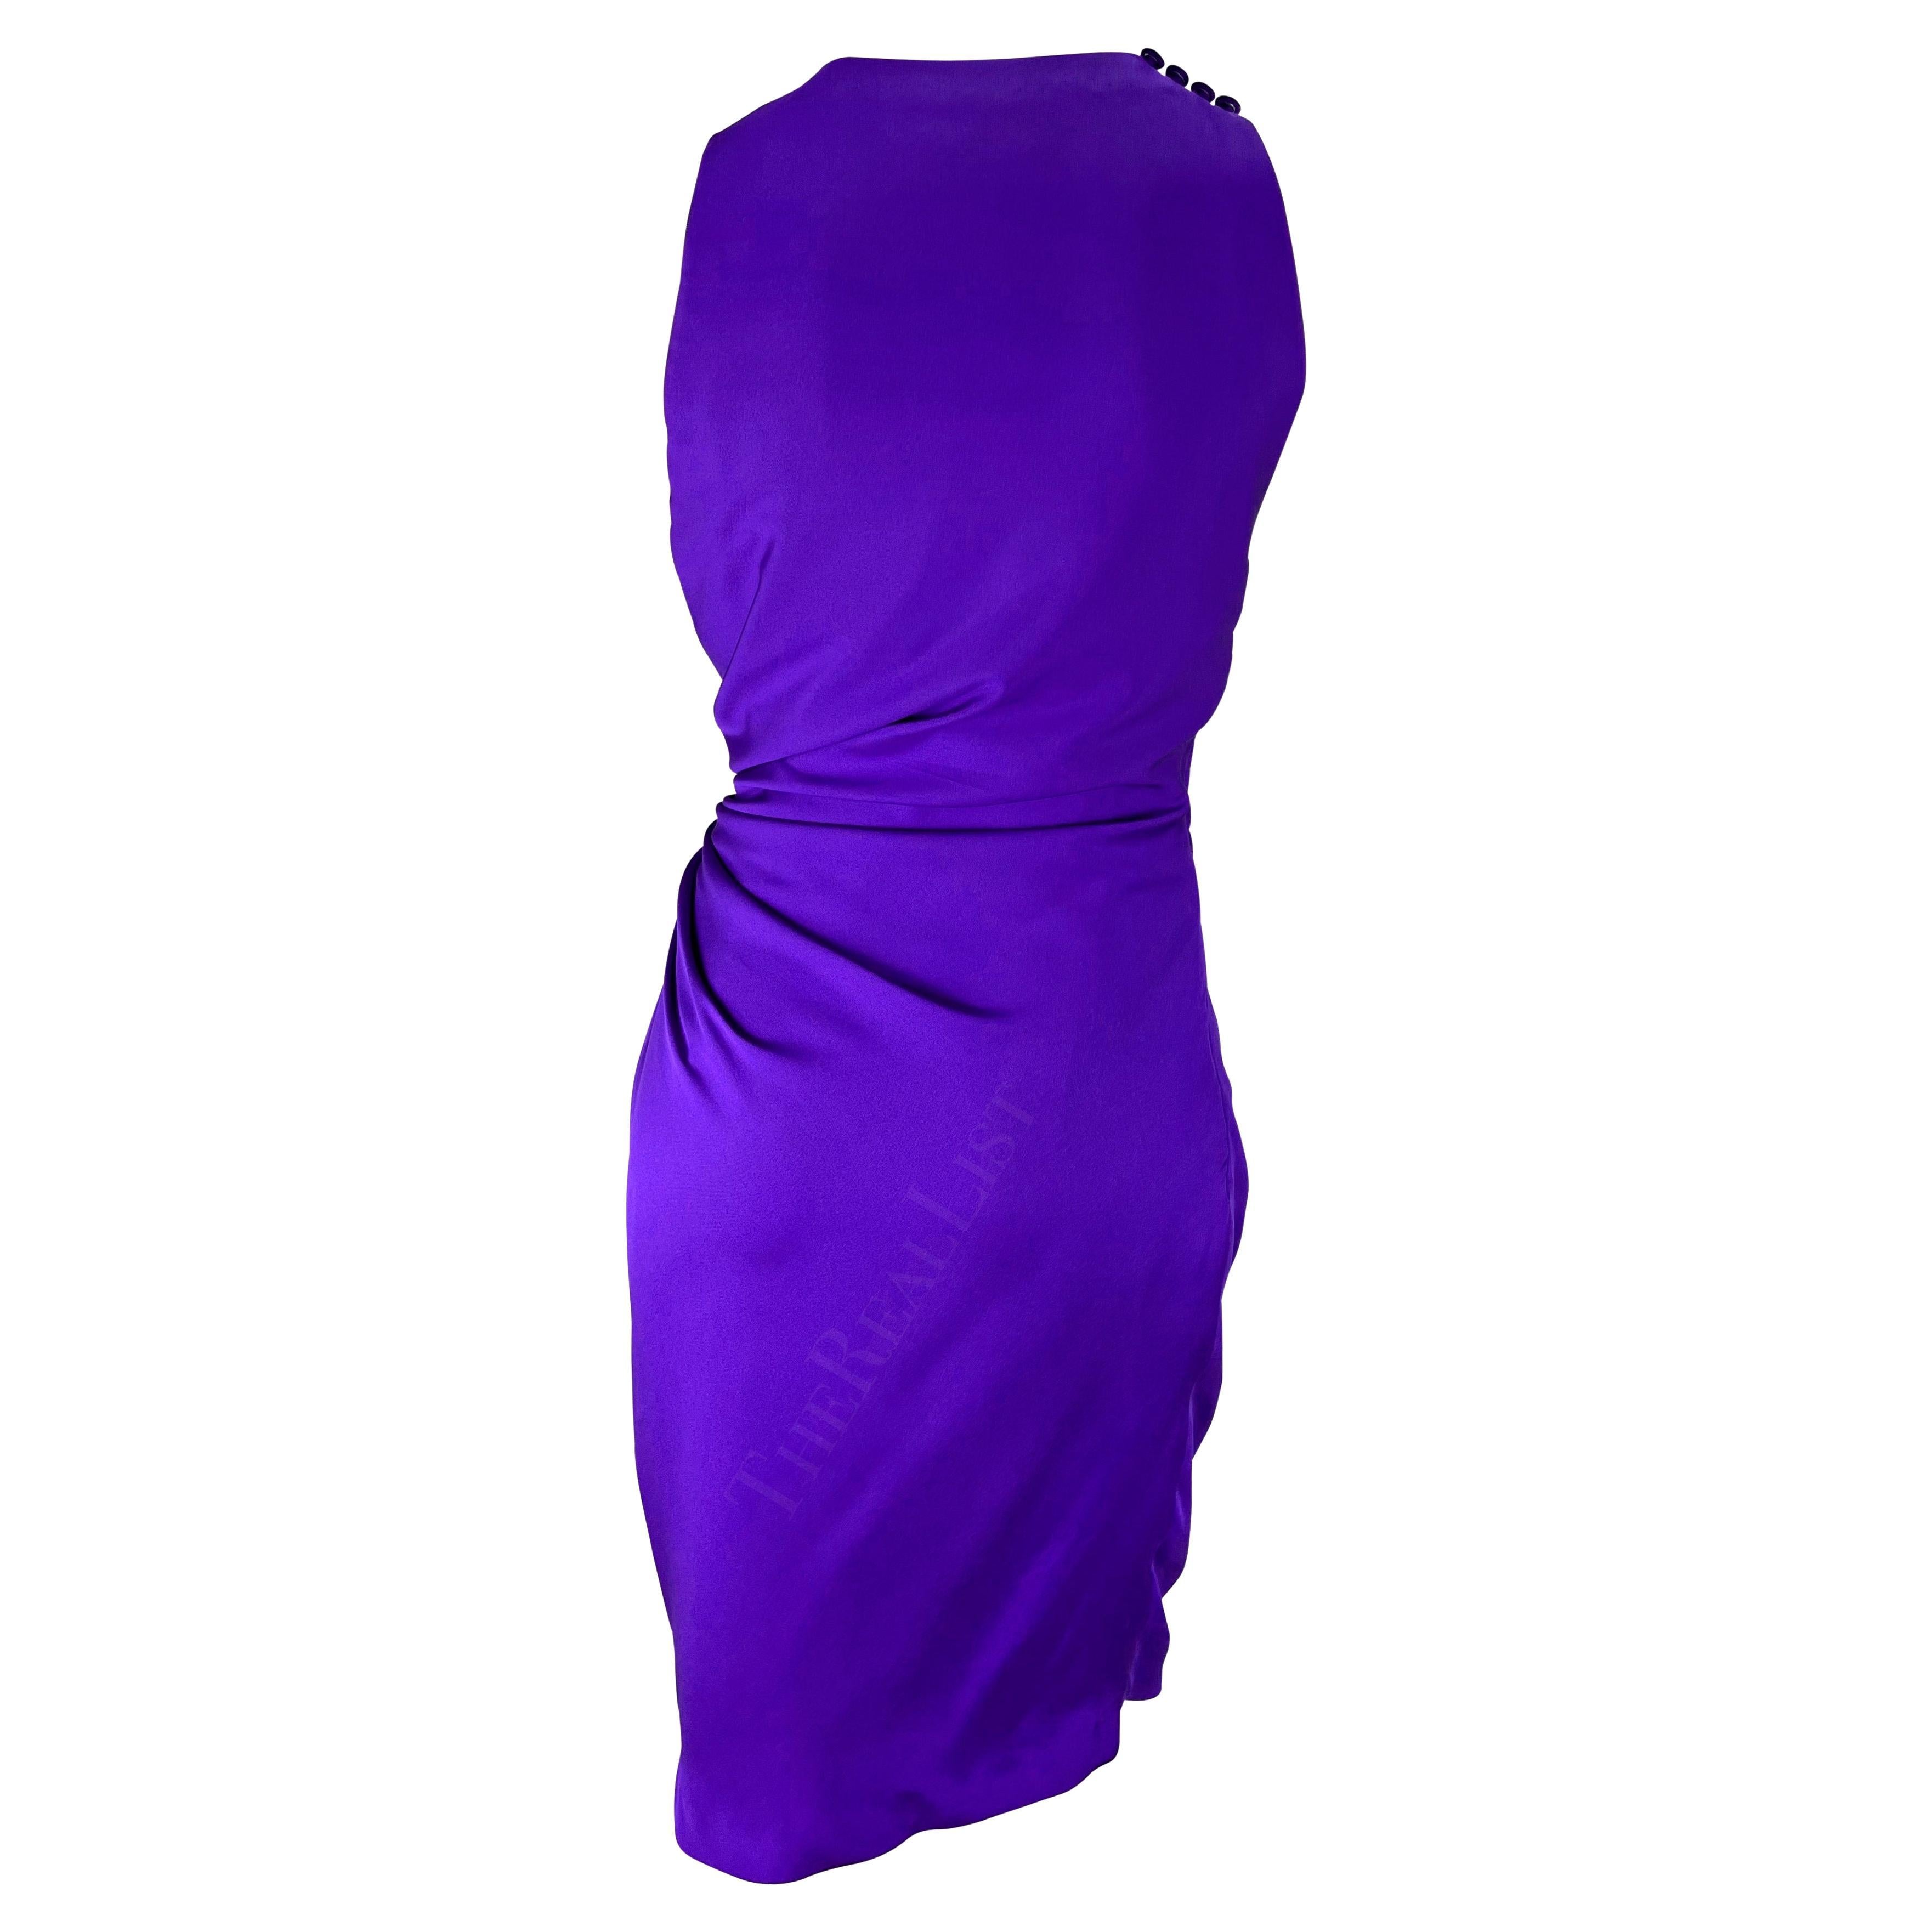 S/S 1991 Gianni Versace Purple Gathered Ruched Sleeveless Cocktail Dress en vente 1